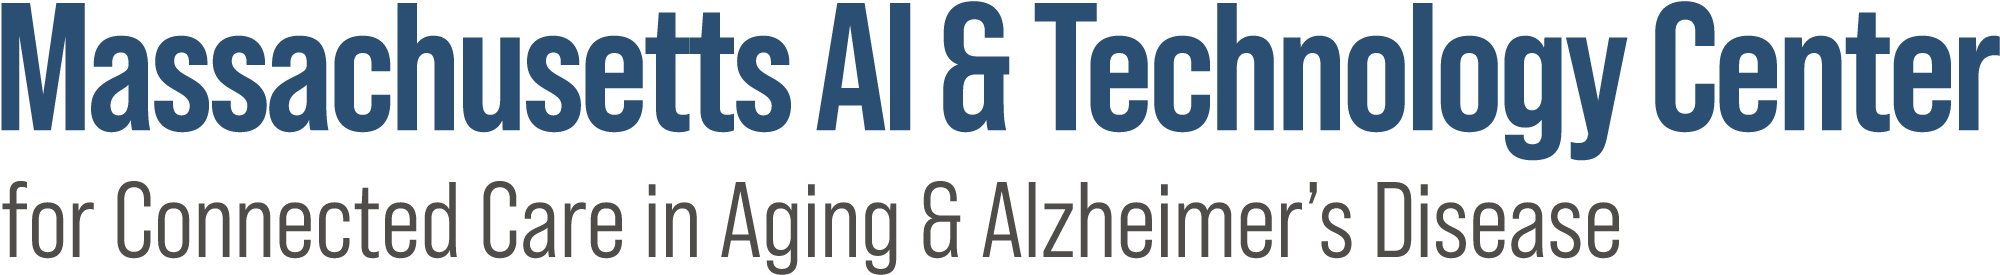 Massachusetts AI & Technology Center for Connected Care in Aging & Alzheimer’s Disease